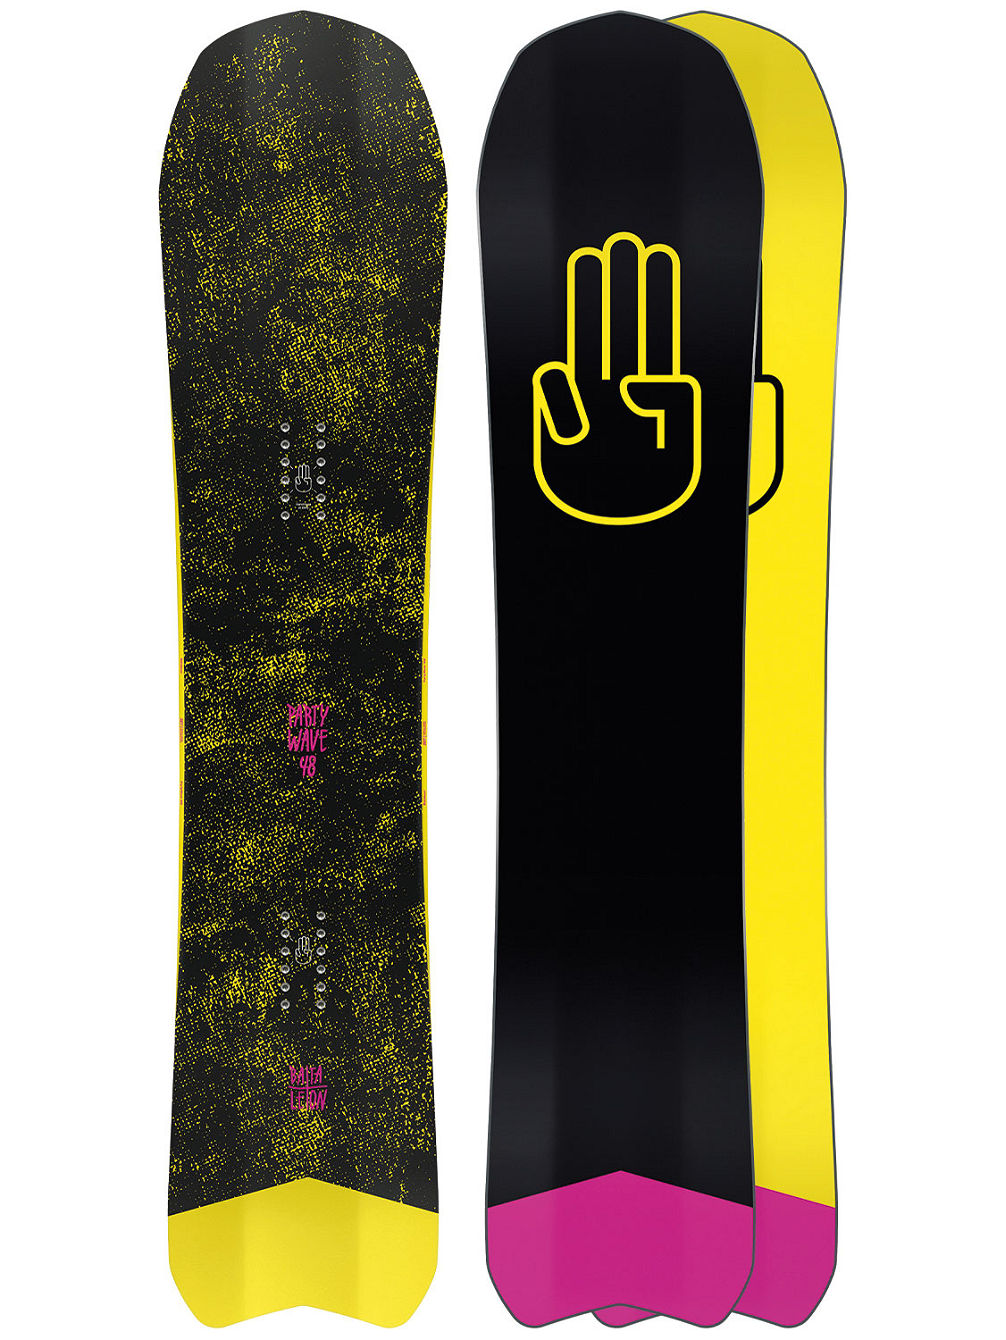 Party Wave 151 Snowboard